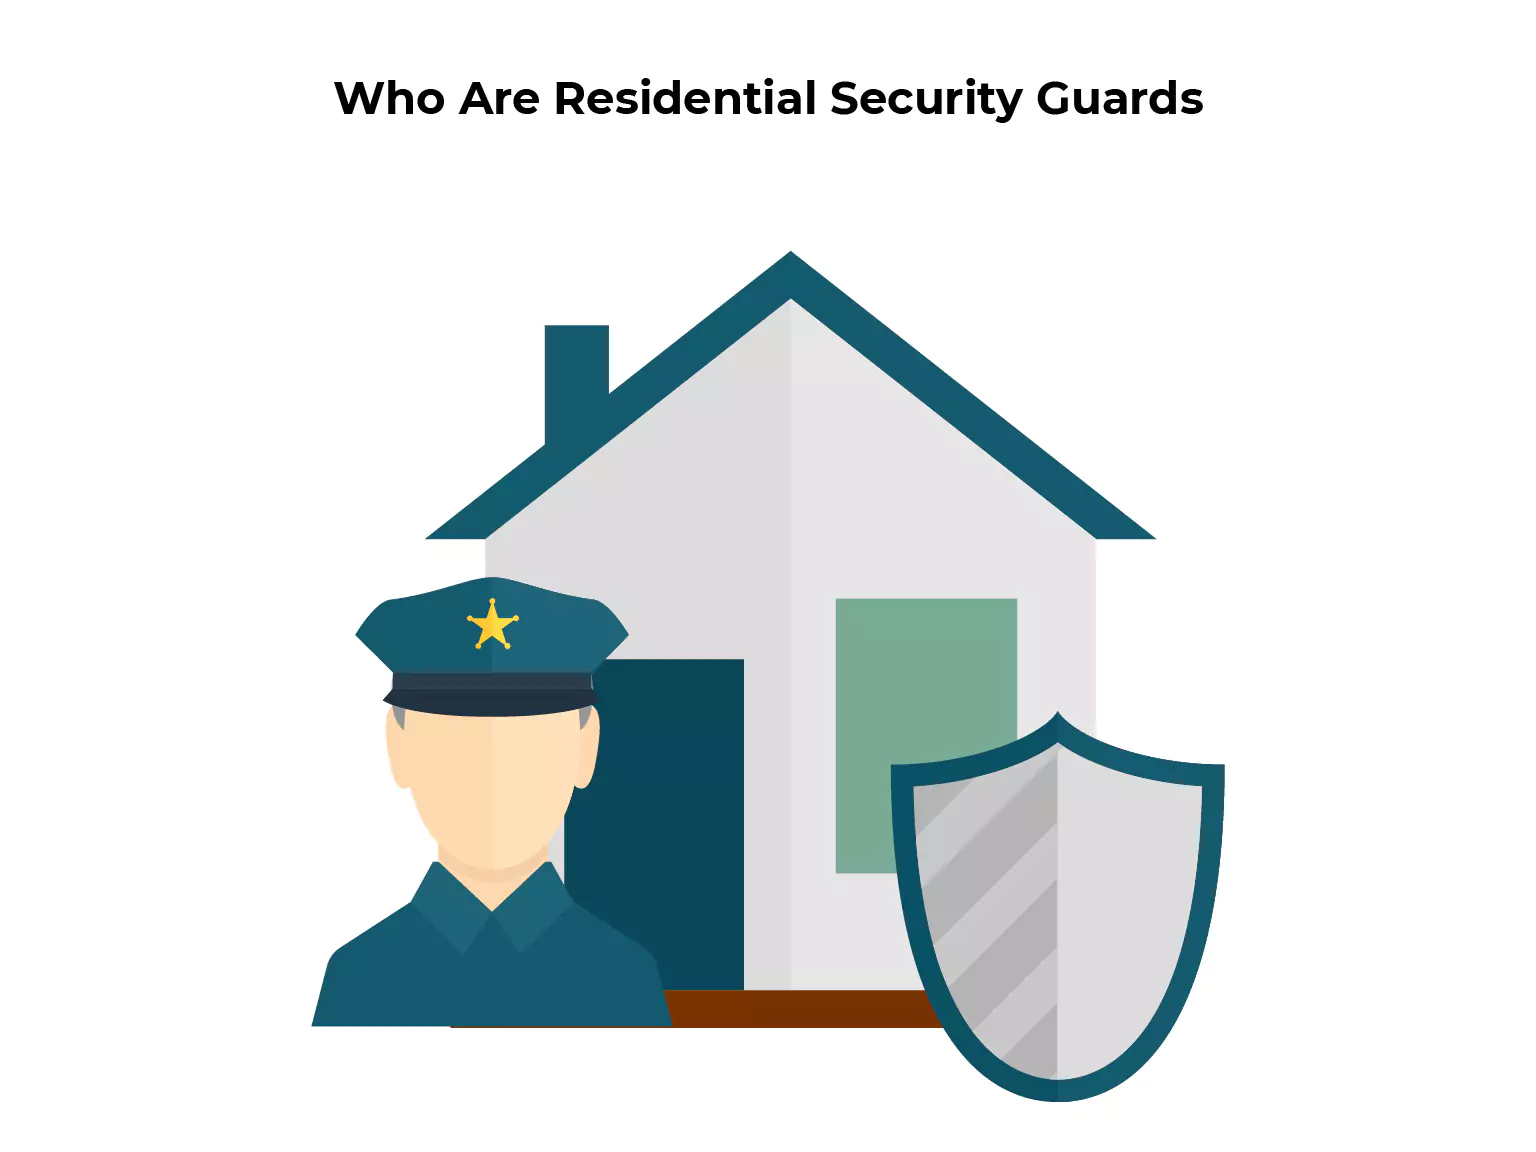 Who Are Residential Security Guards?